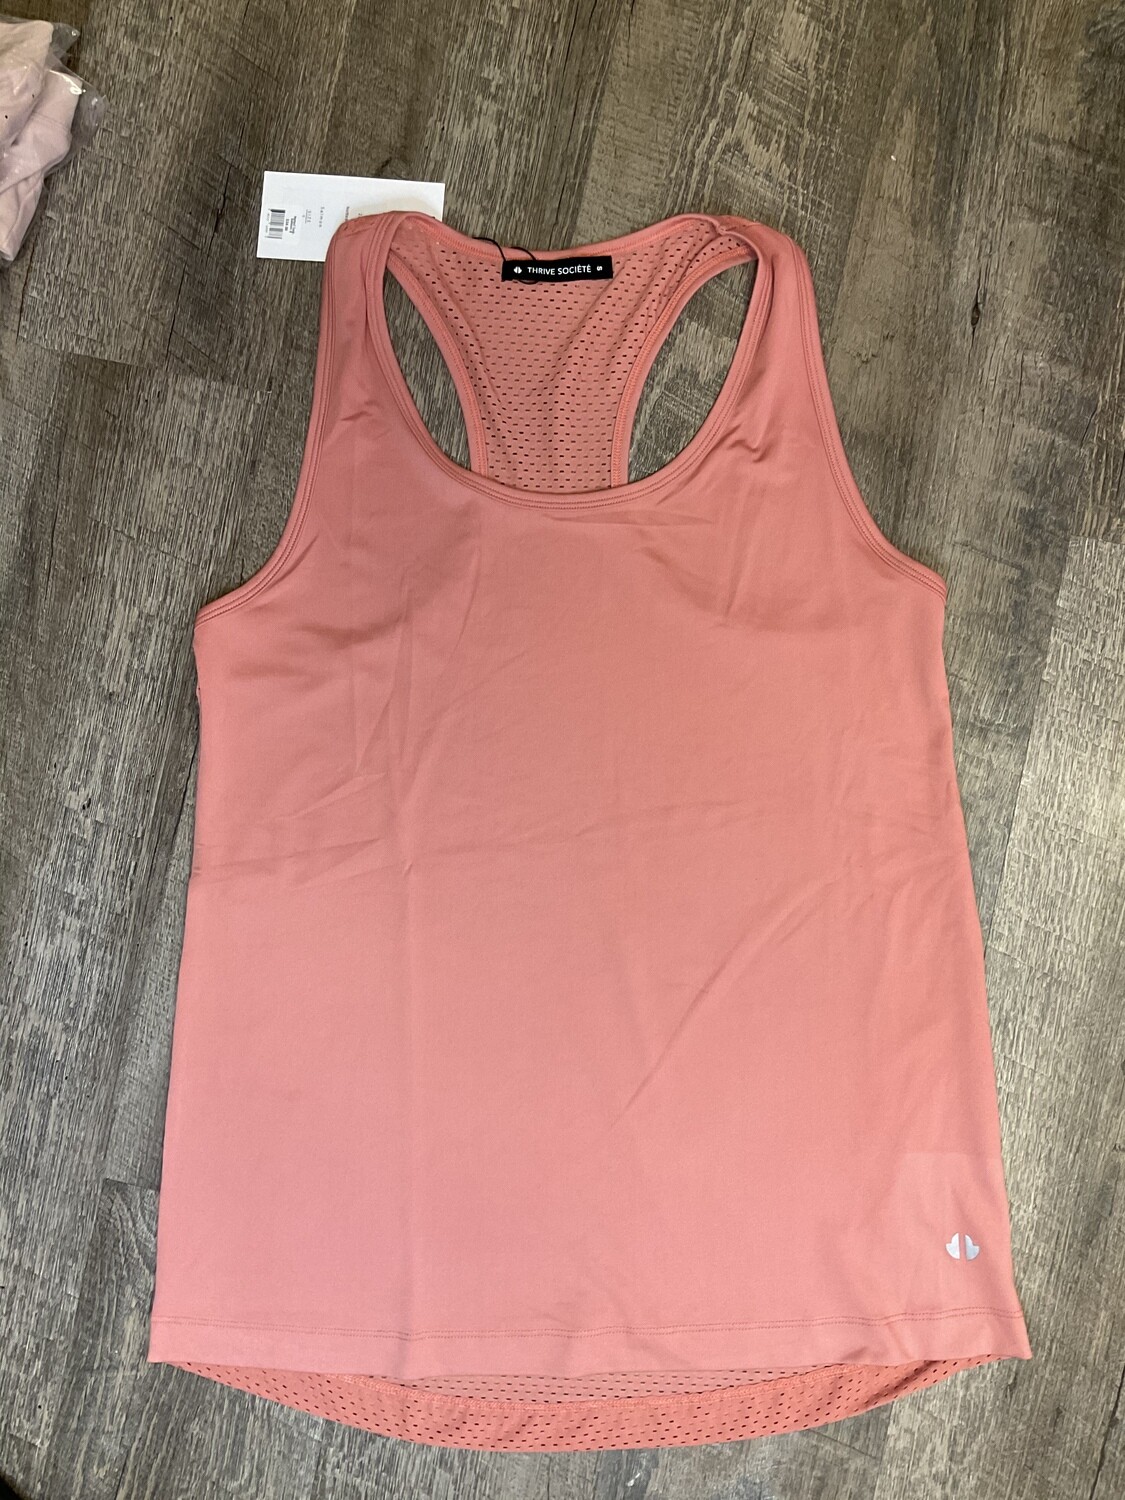 Netted Tank: Salmon